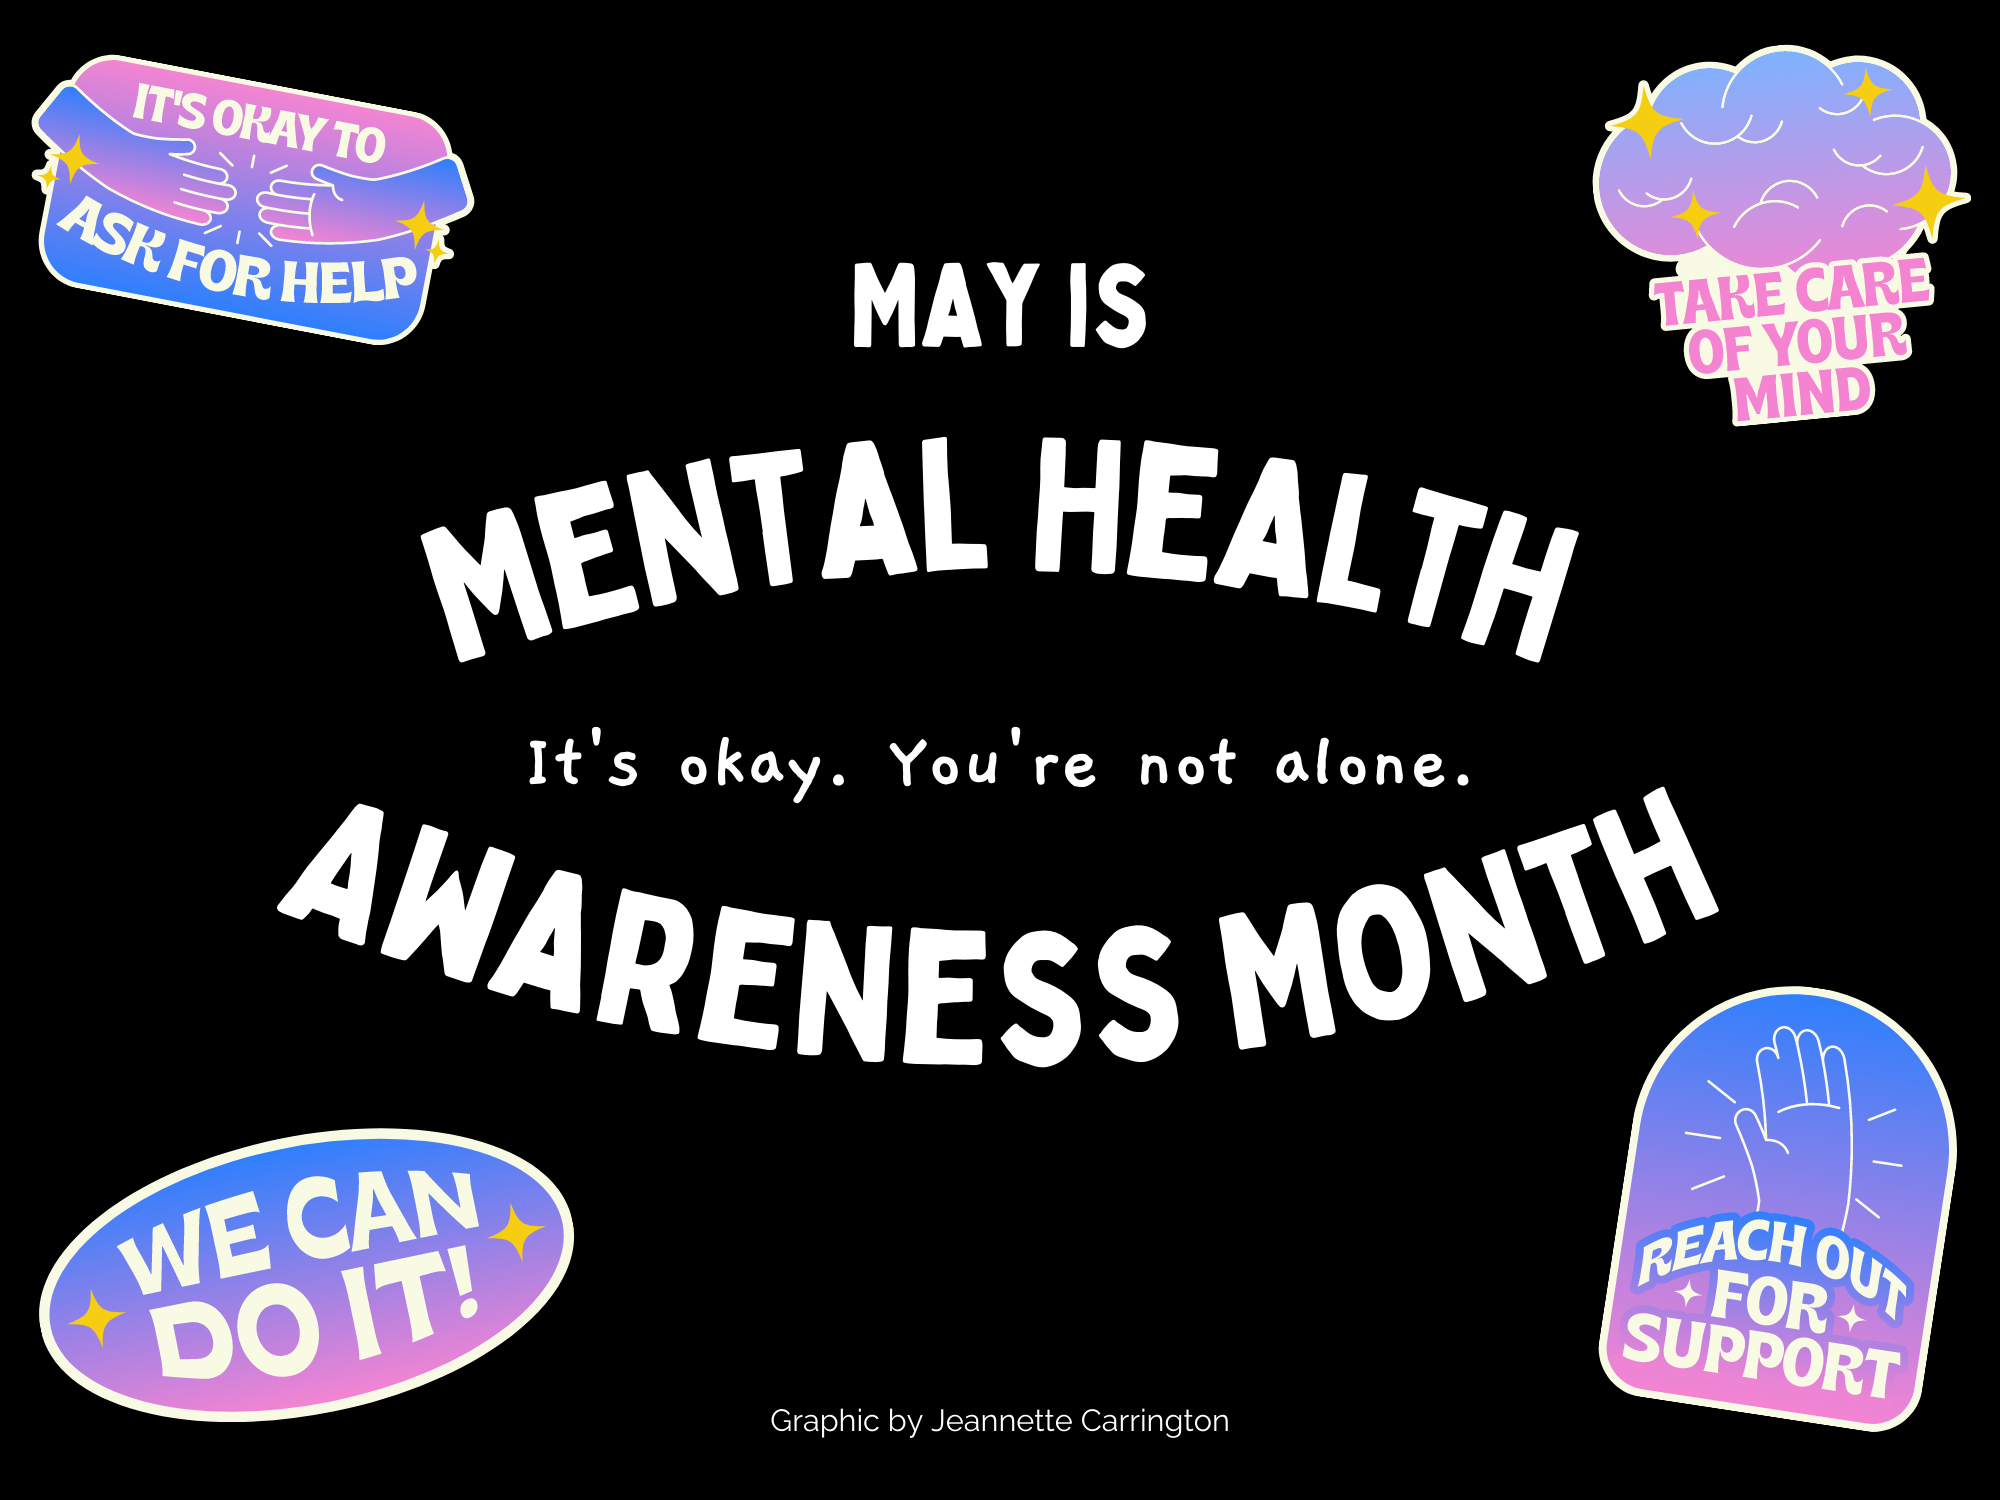 May is Mental Health Awareness month. You are not alone.